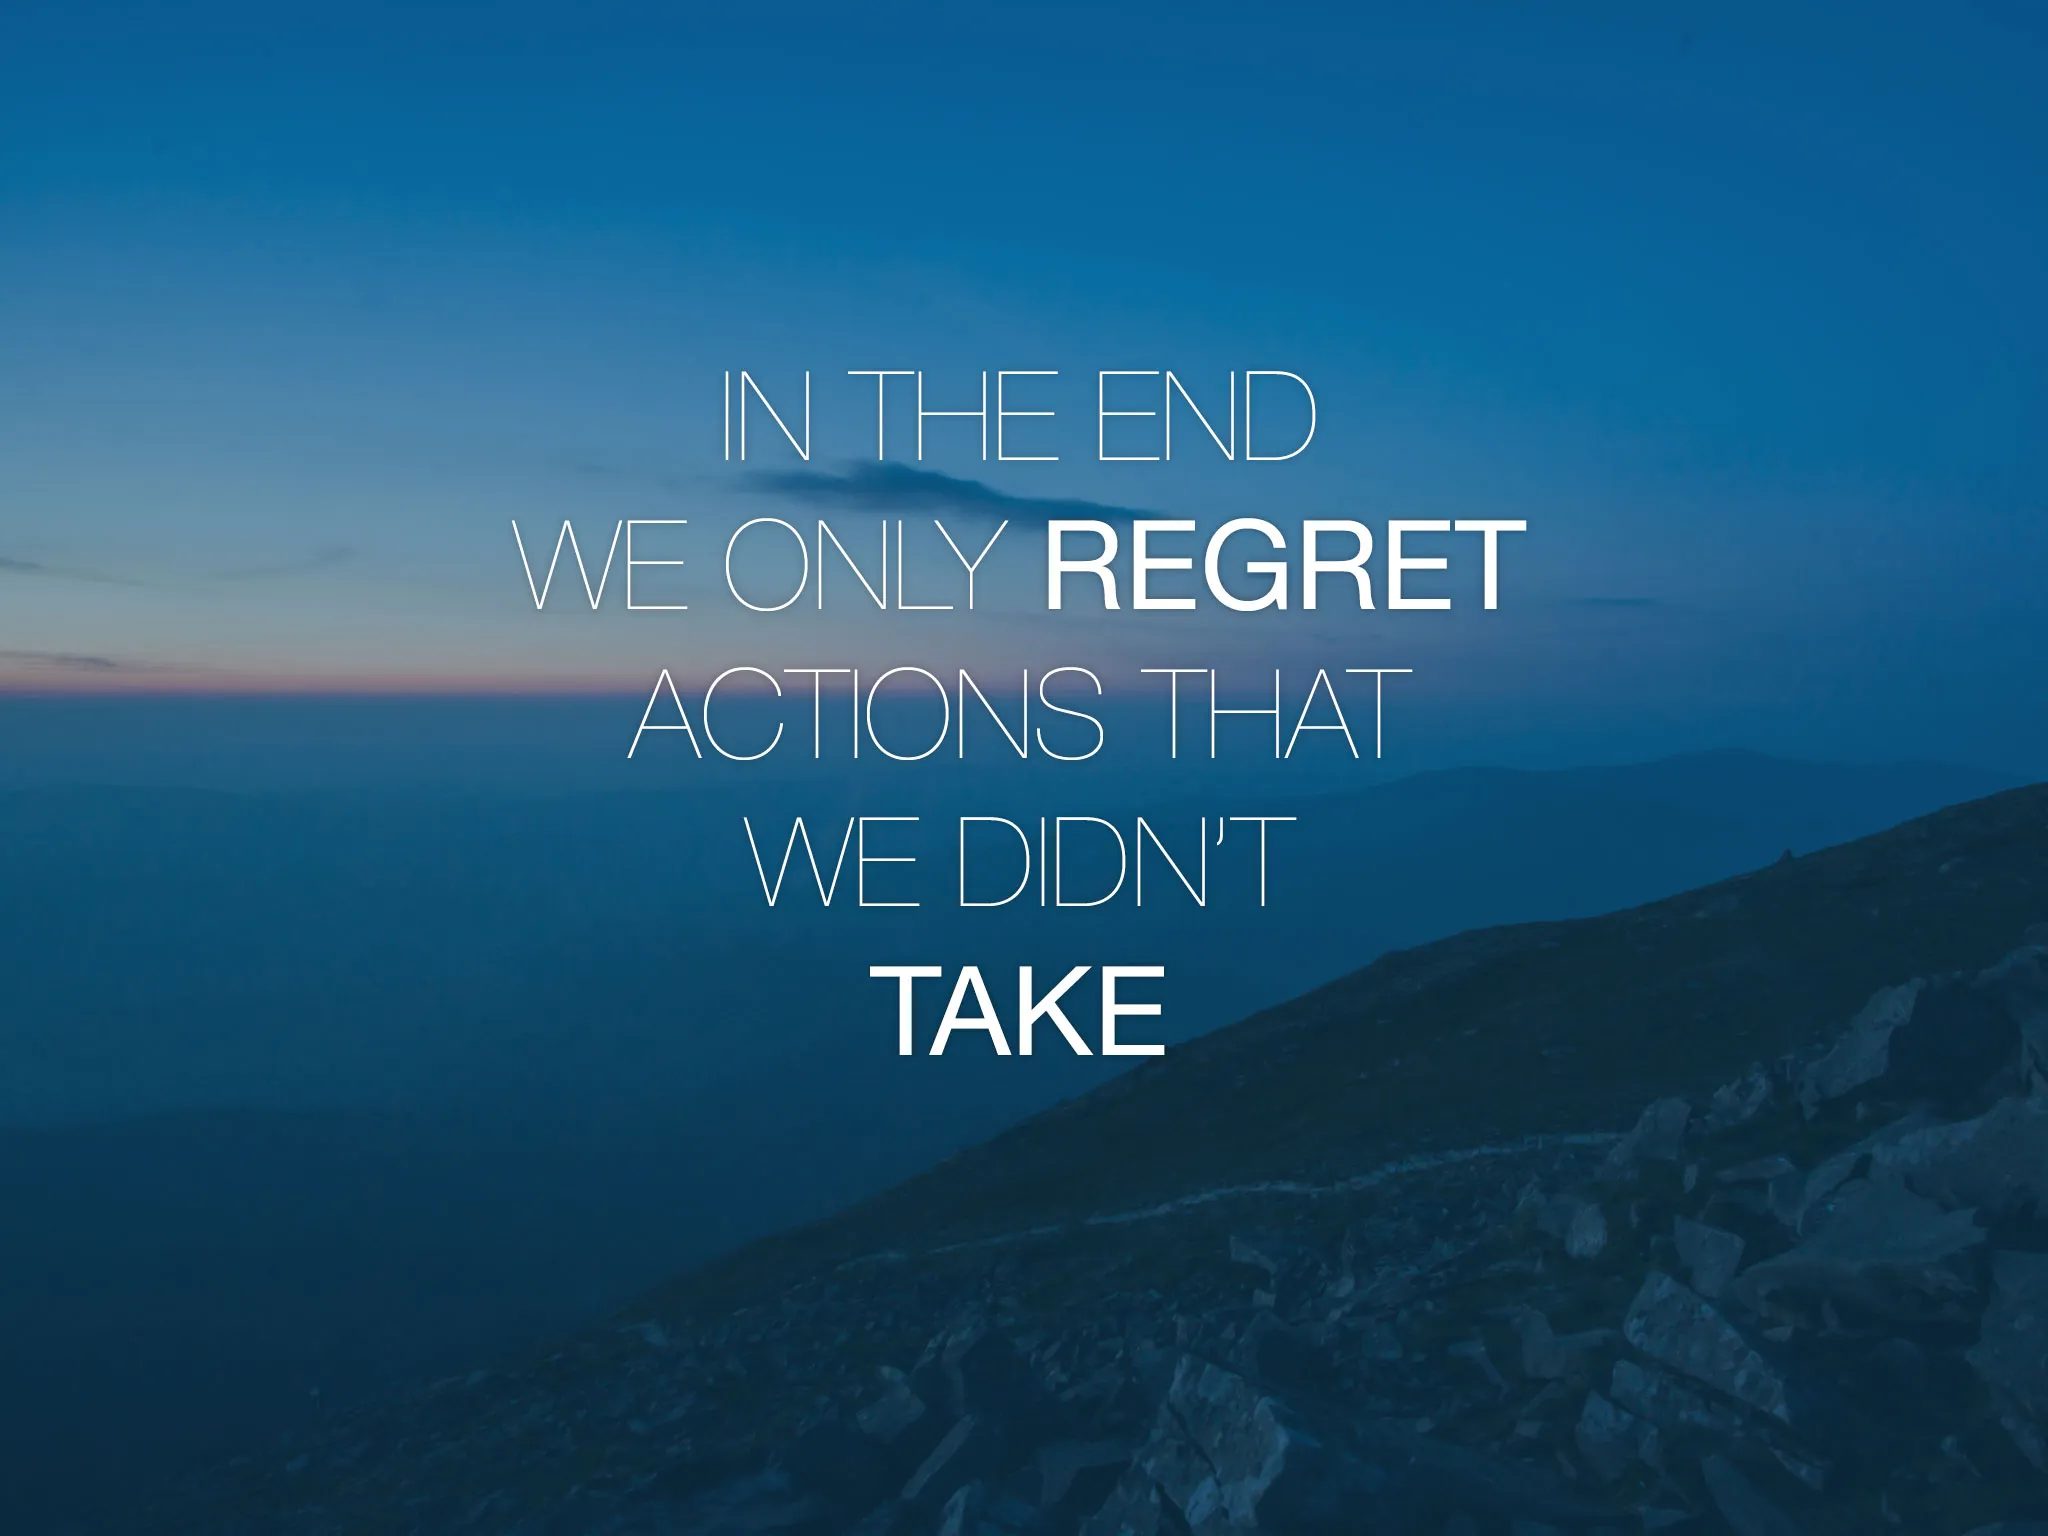 In the end, we only regret actions that we didn't take